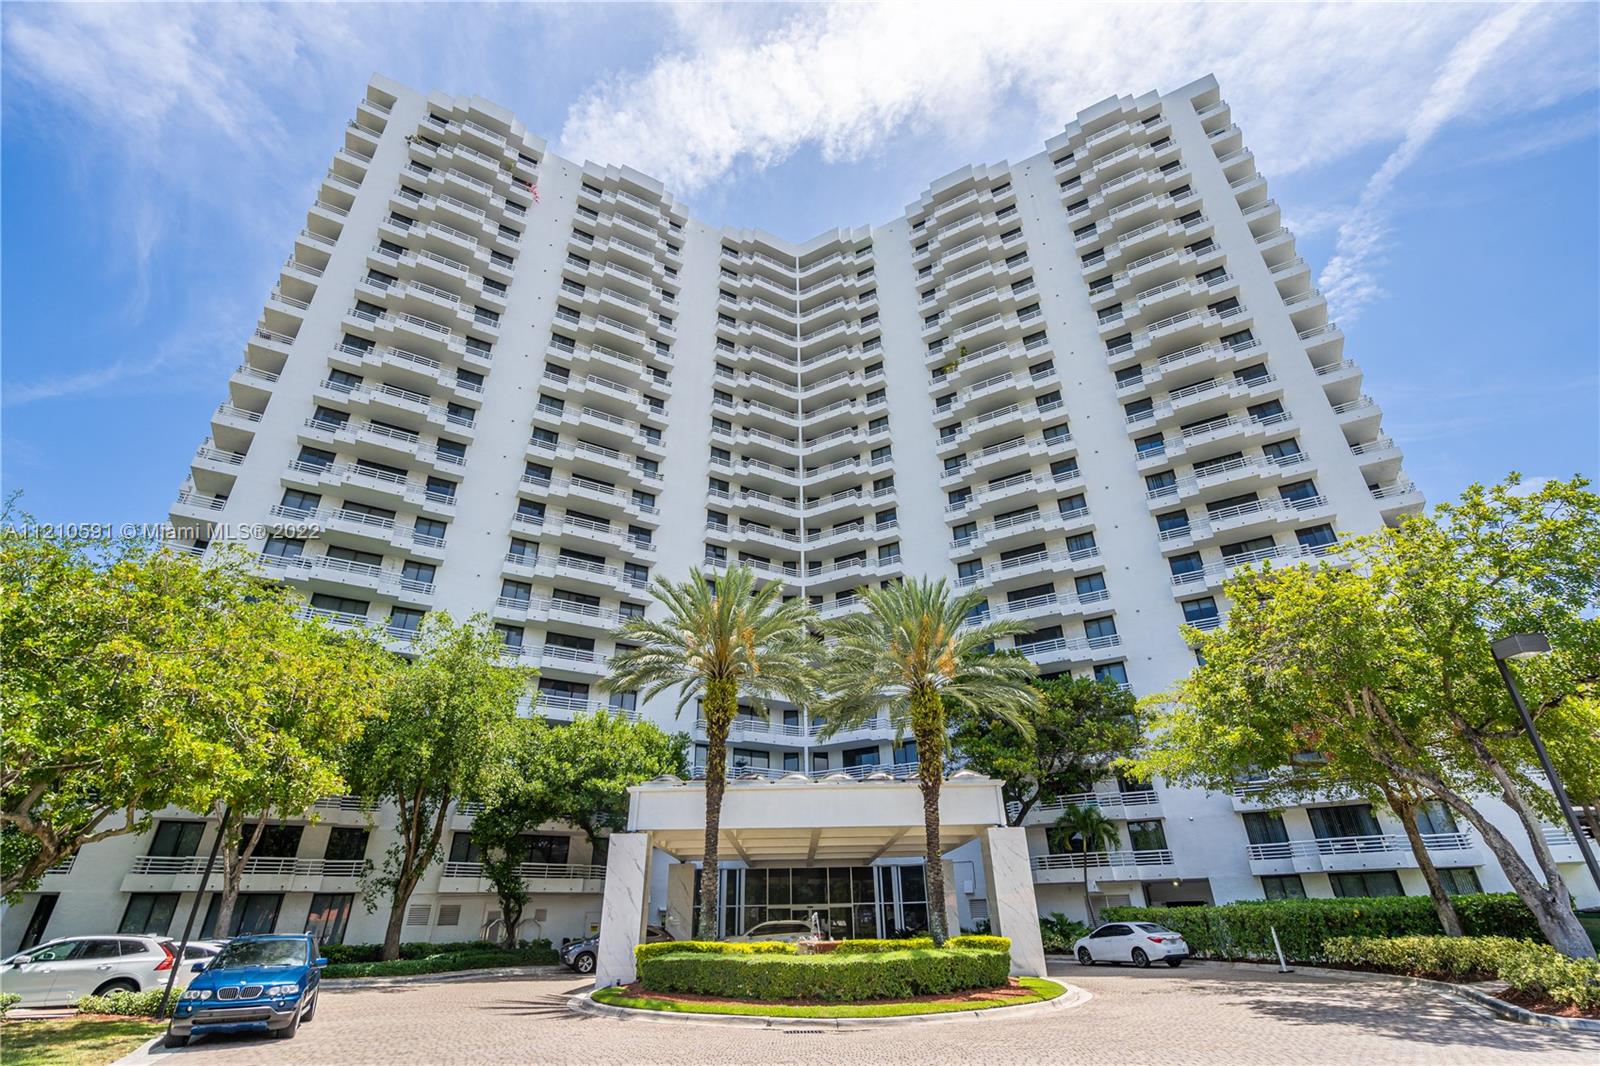 This unit is perfectly located in Aventura.  Close to the world-famous Aventura Mall and minutes away from the amazing Sunny Isles Beach.  Unit is in pristine condition.  It's a one-bedroom but has been converted to a two bedroom and a smaller den area (see pics.) Building offers luxurious amenities that will make you proud to invite friends and family over.  The lobby alone has that "WOW!" factor when you and your guests enter the building.  The mall is not the only thing that Aventura offers.  It is a hidden gem with many fine restaurants, shops, children's extracurricular activities, highly sought public & private schools, etc.  Building offers heated pool, exercise room, community room, and much more.